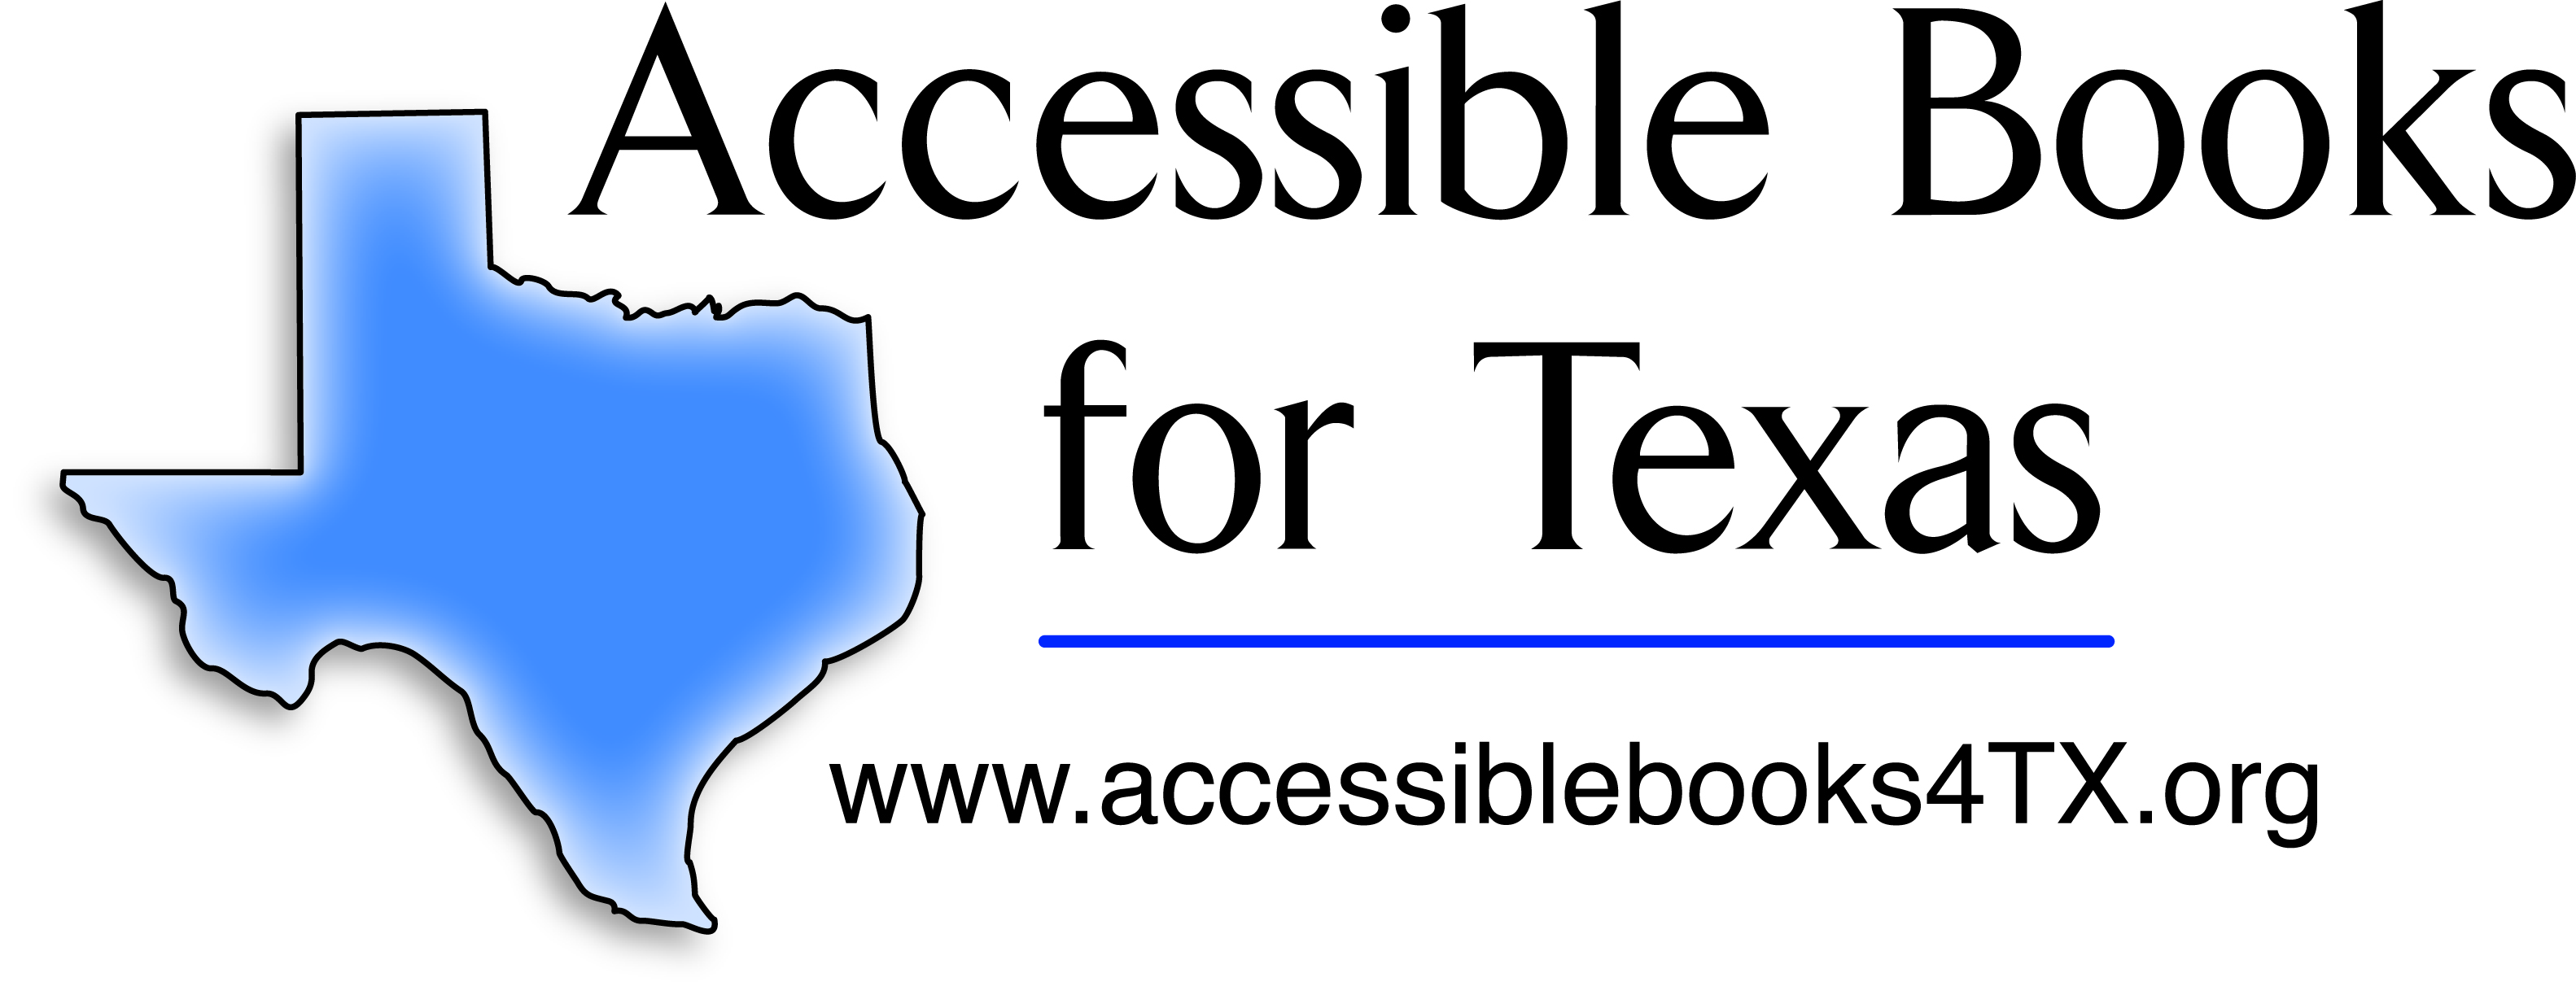 Accessible Books for Texas logo